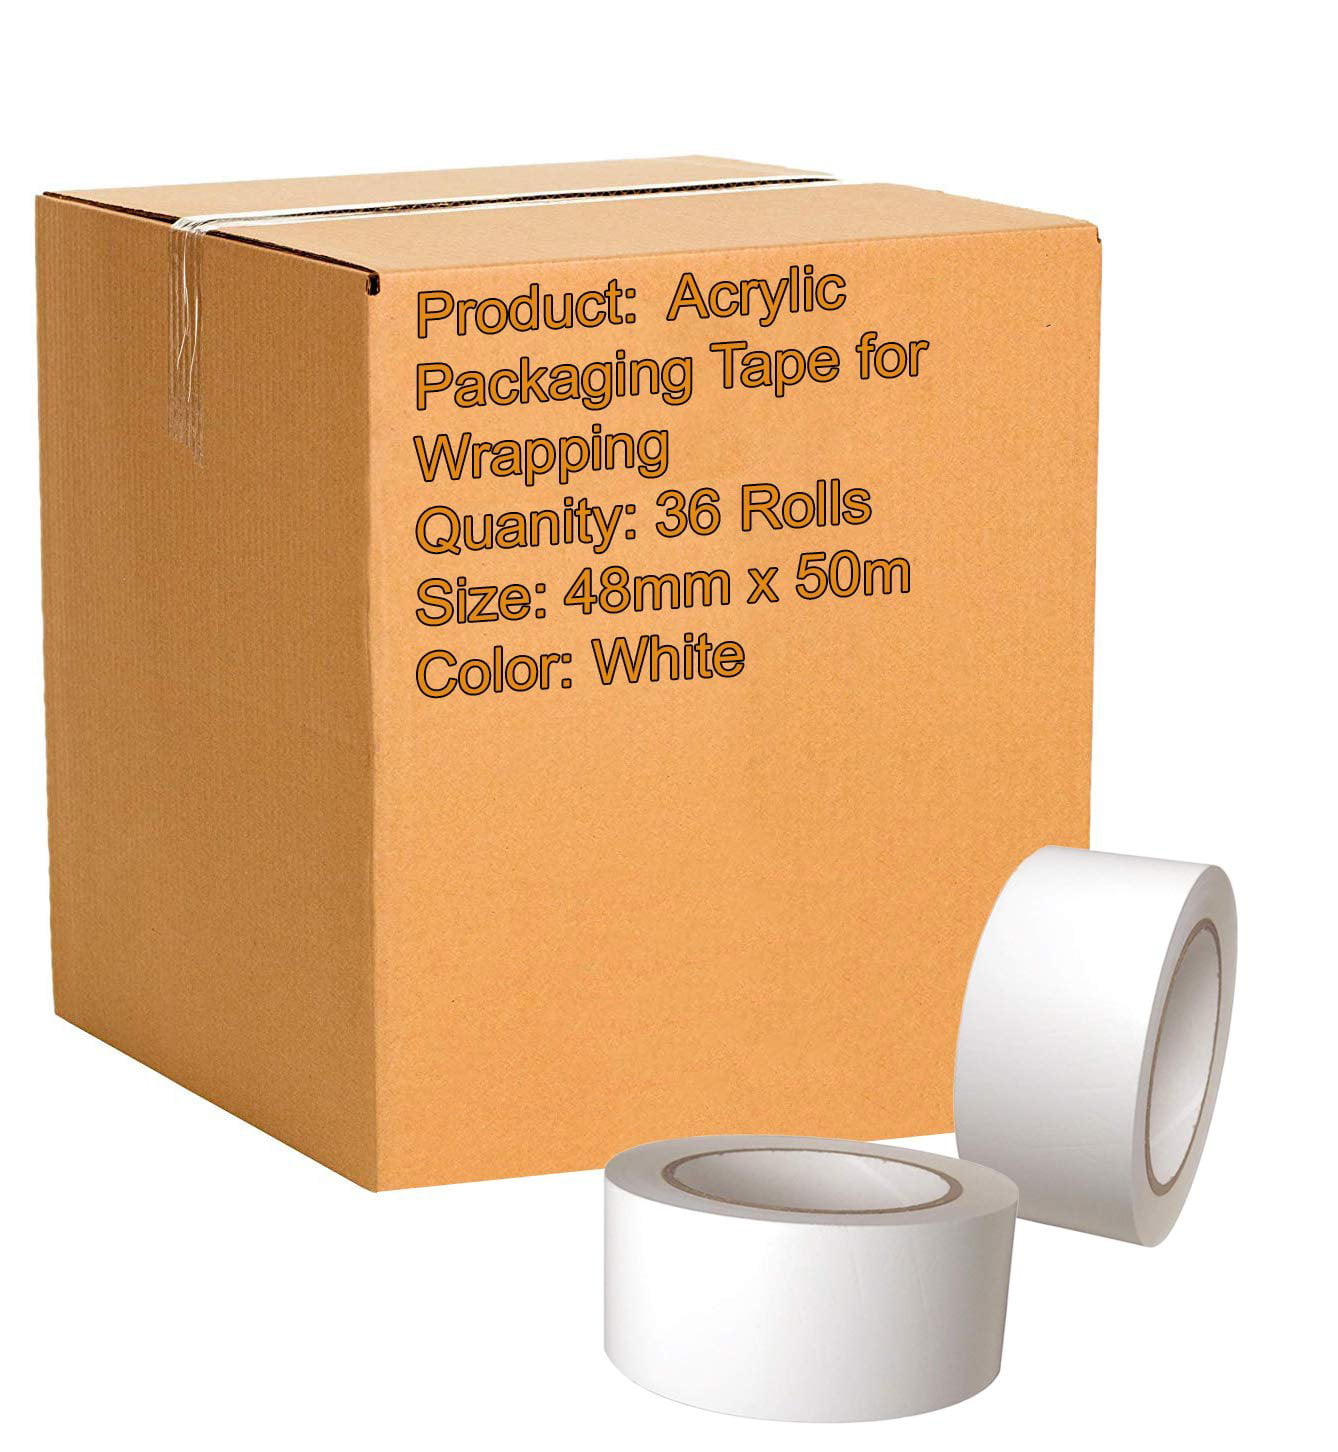 LONG LENGTH PACKING TAPE STRONG BROWN FRAGILE 48mm x50M PARCEL TAPE CLEAR 